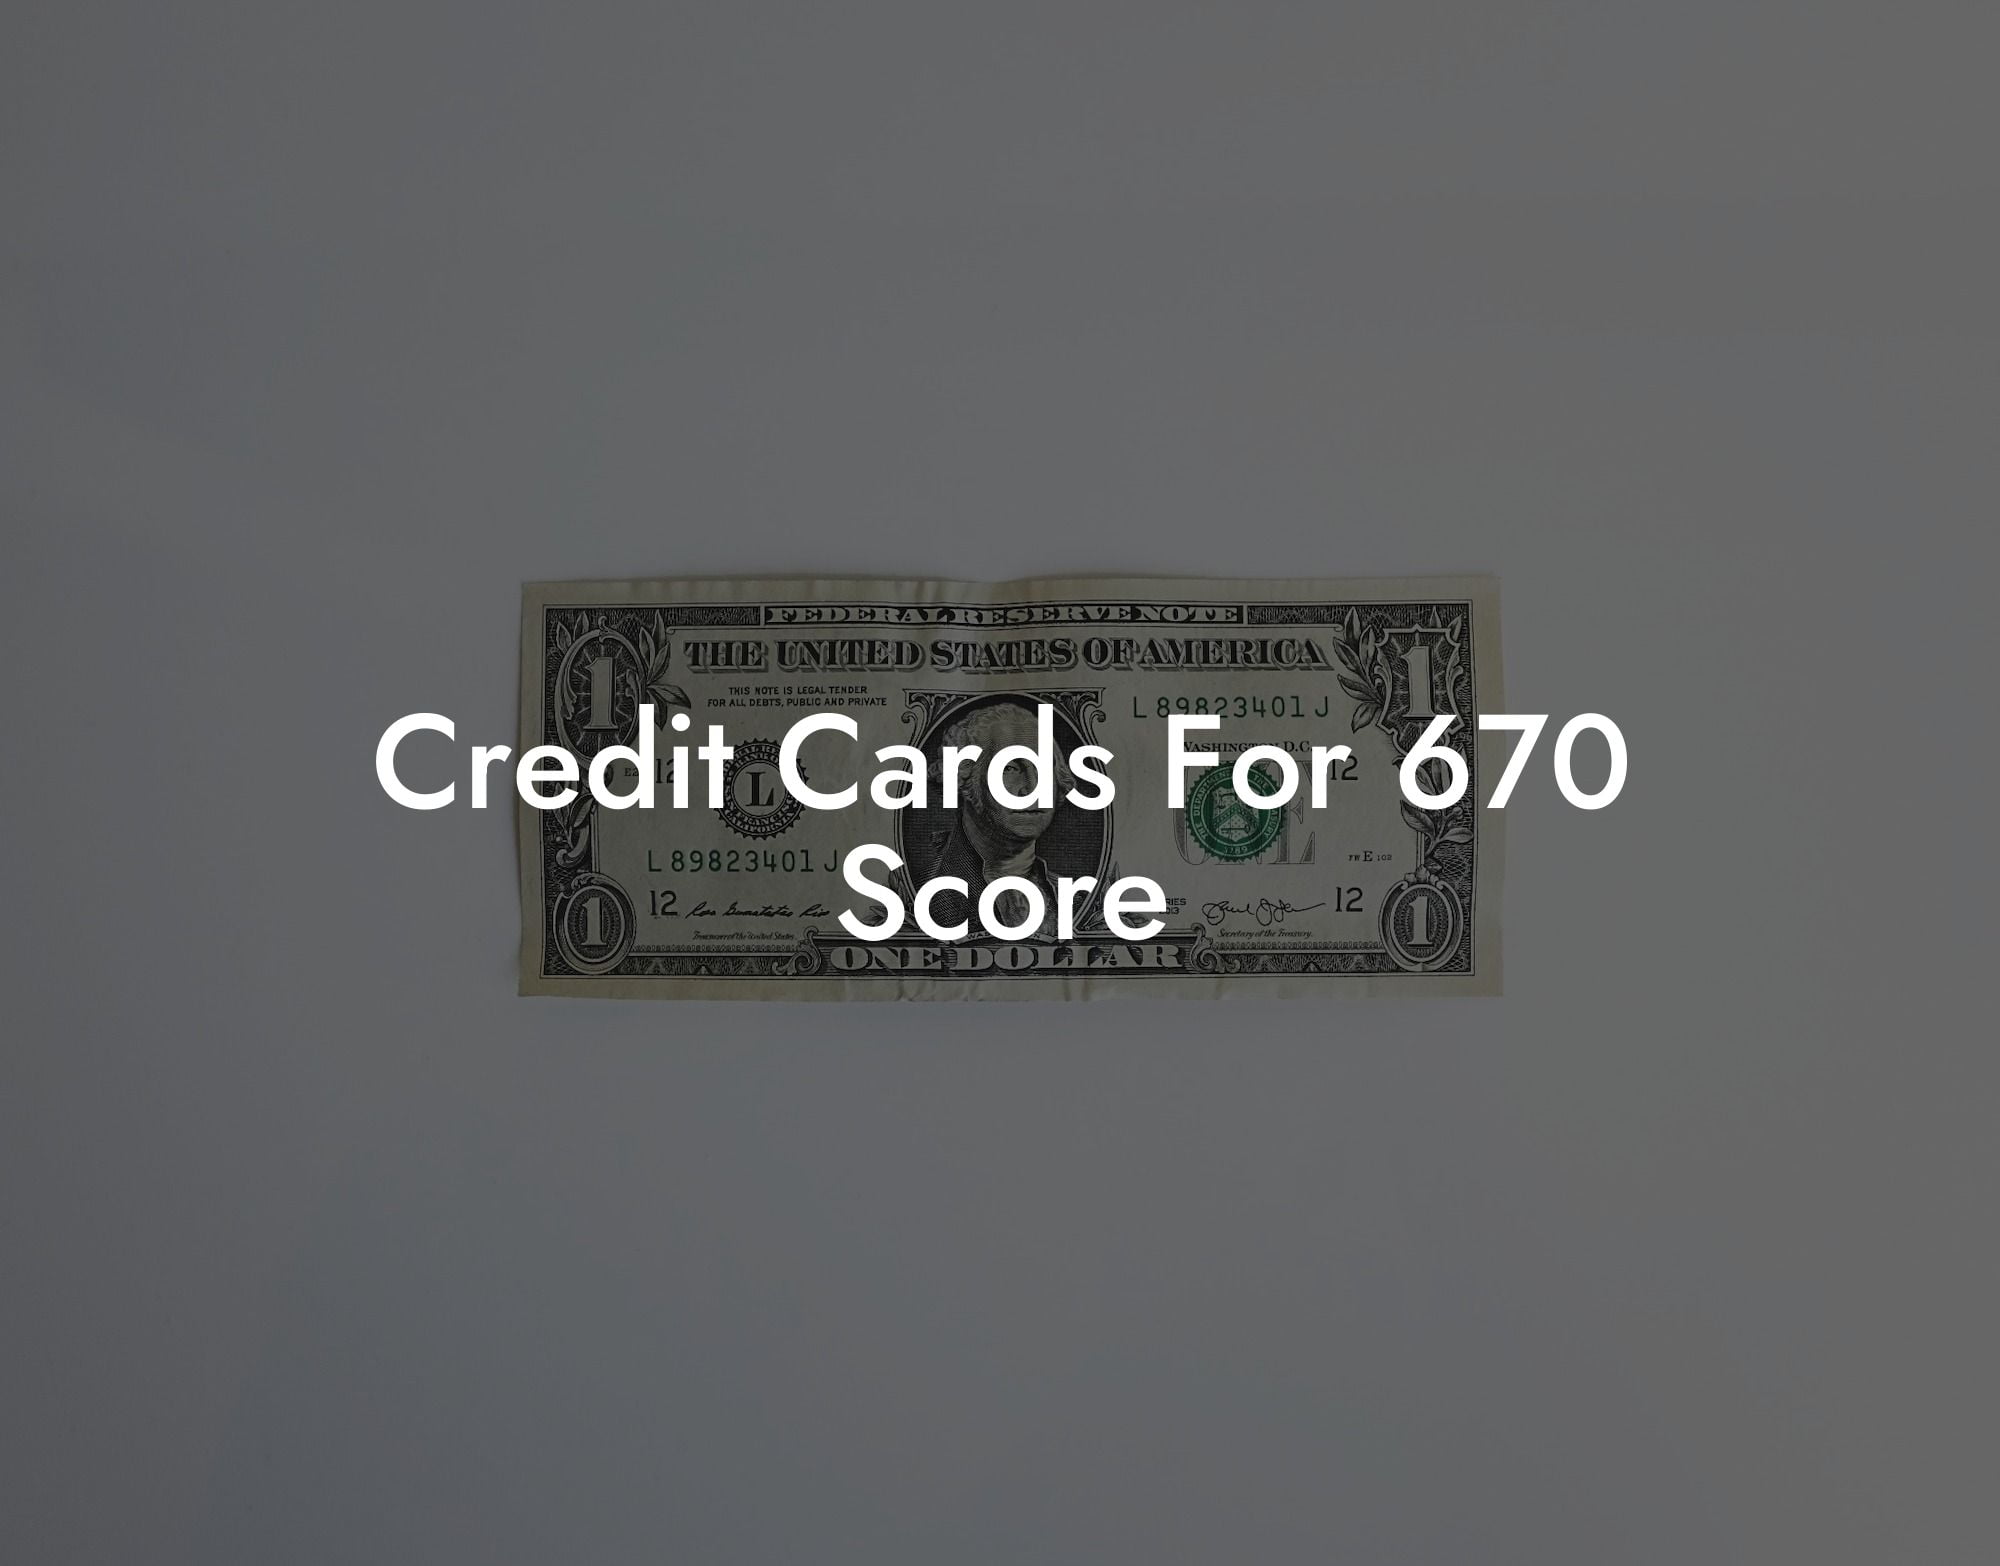 Credit Cards For 670 Score